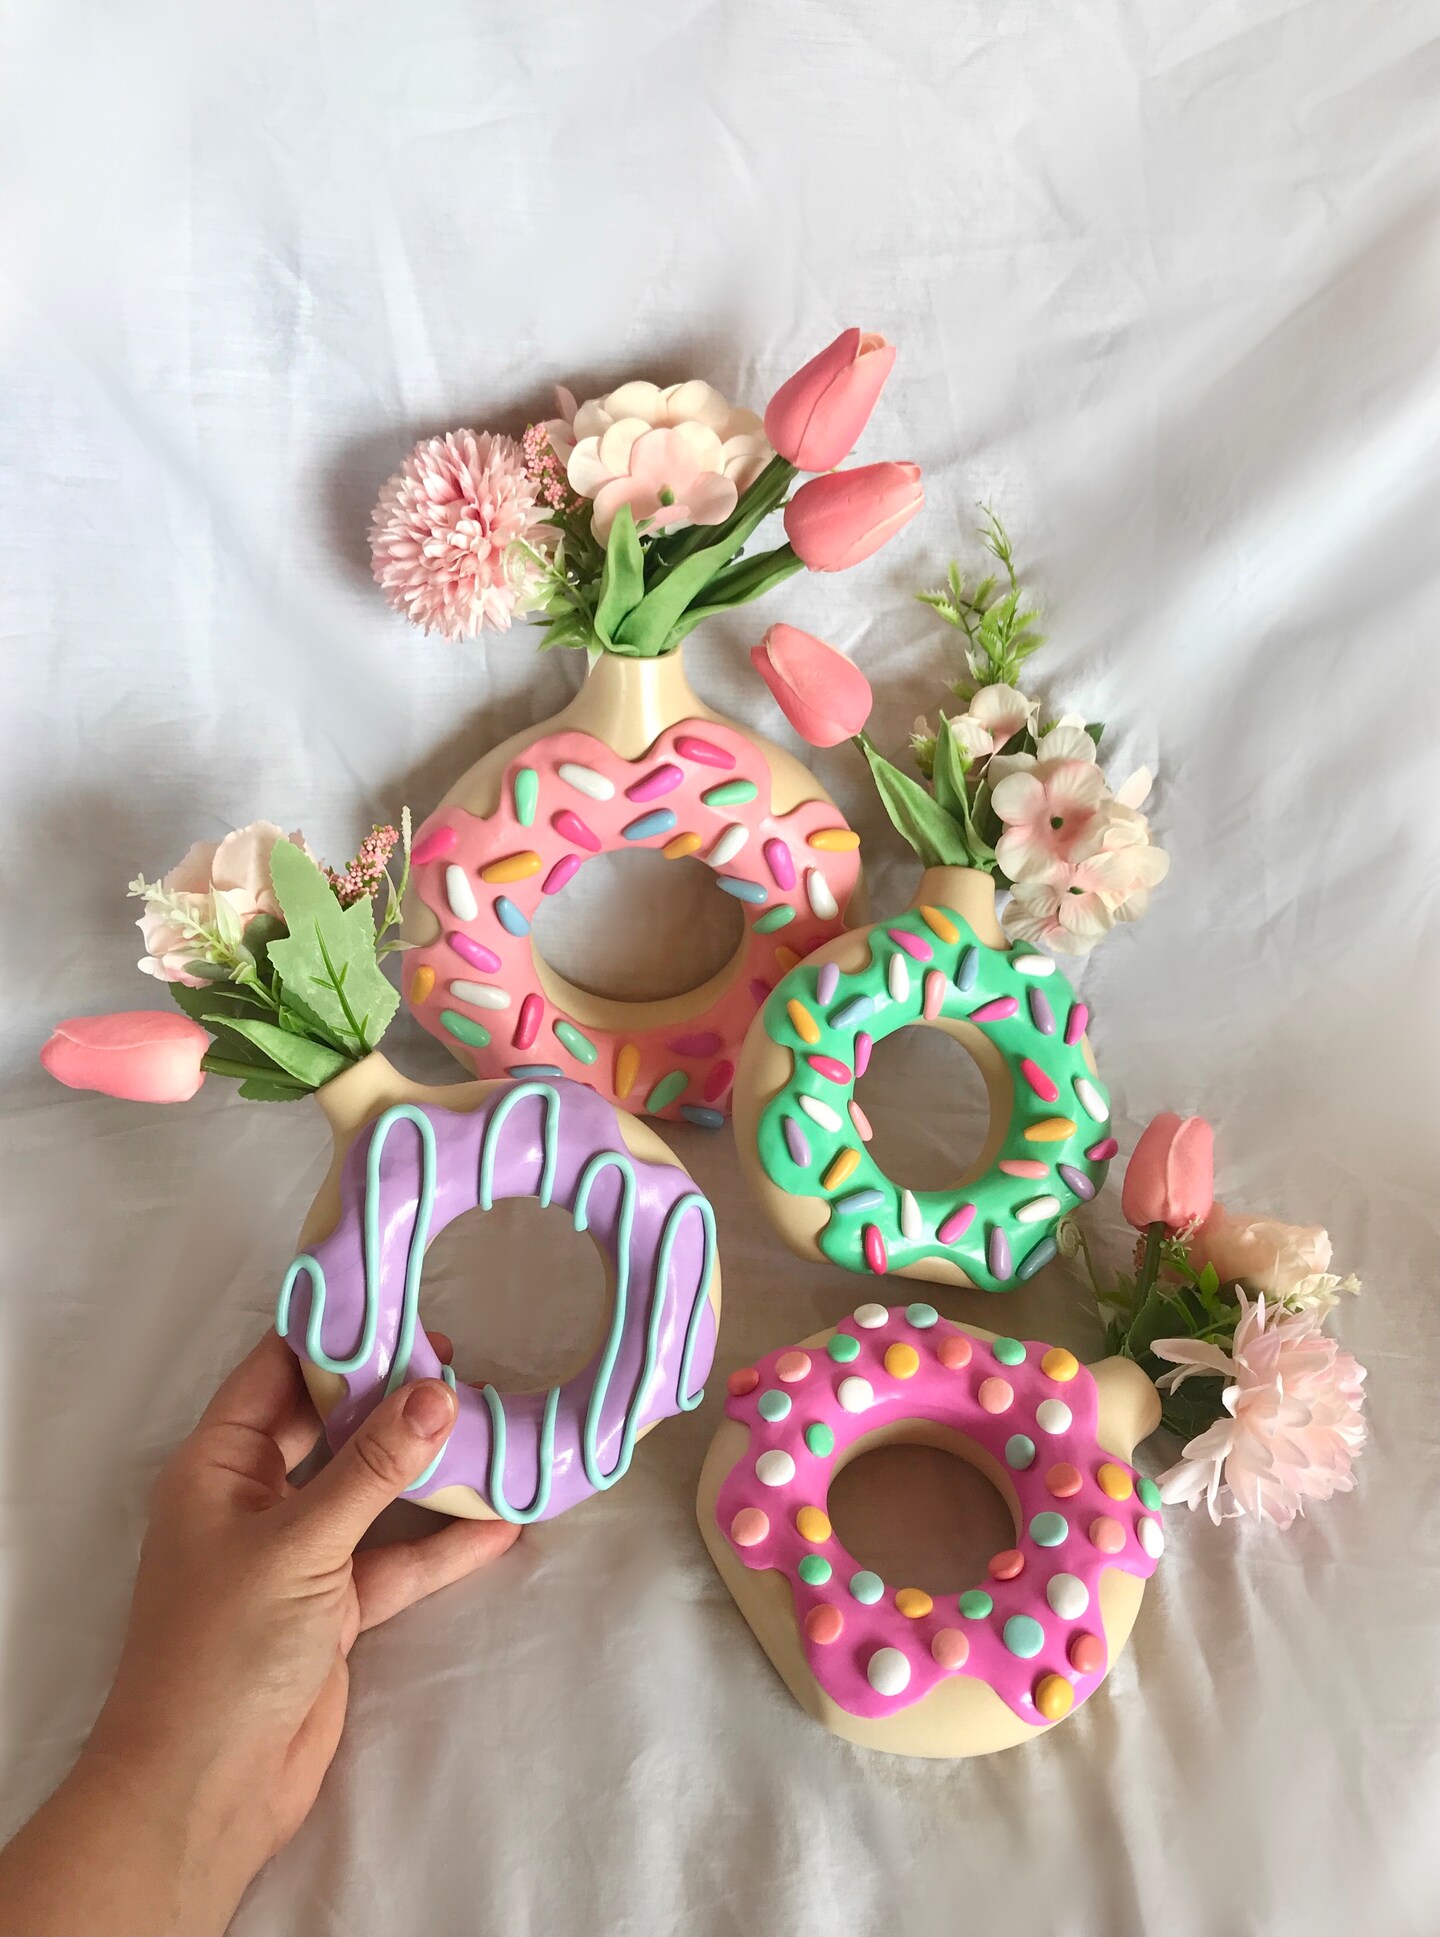 Donut Vase, Doughnut Vase, Cute Decor, Colorful Home Decor, Sprinkles Icing  Frosting Frosted Donut Vases, Quirky Kawaii Food Decorations